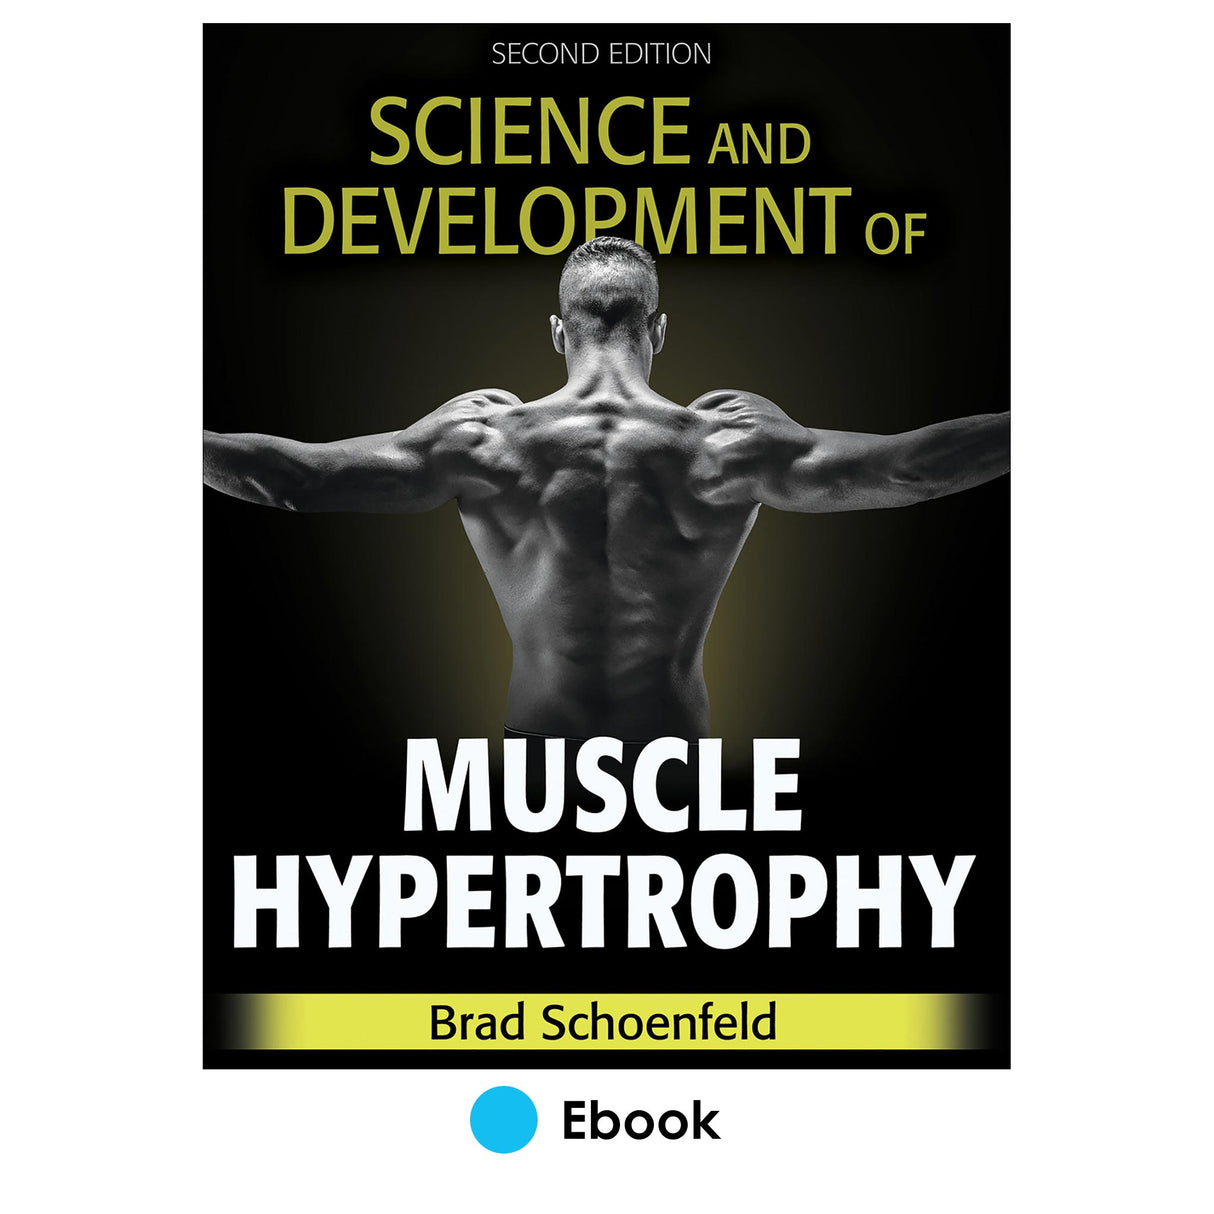 Science and Development of Muscle Hypertrophy 2nd Edition epub